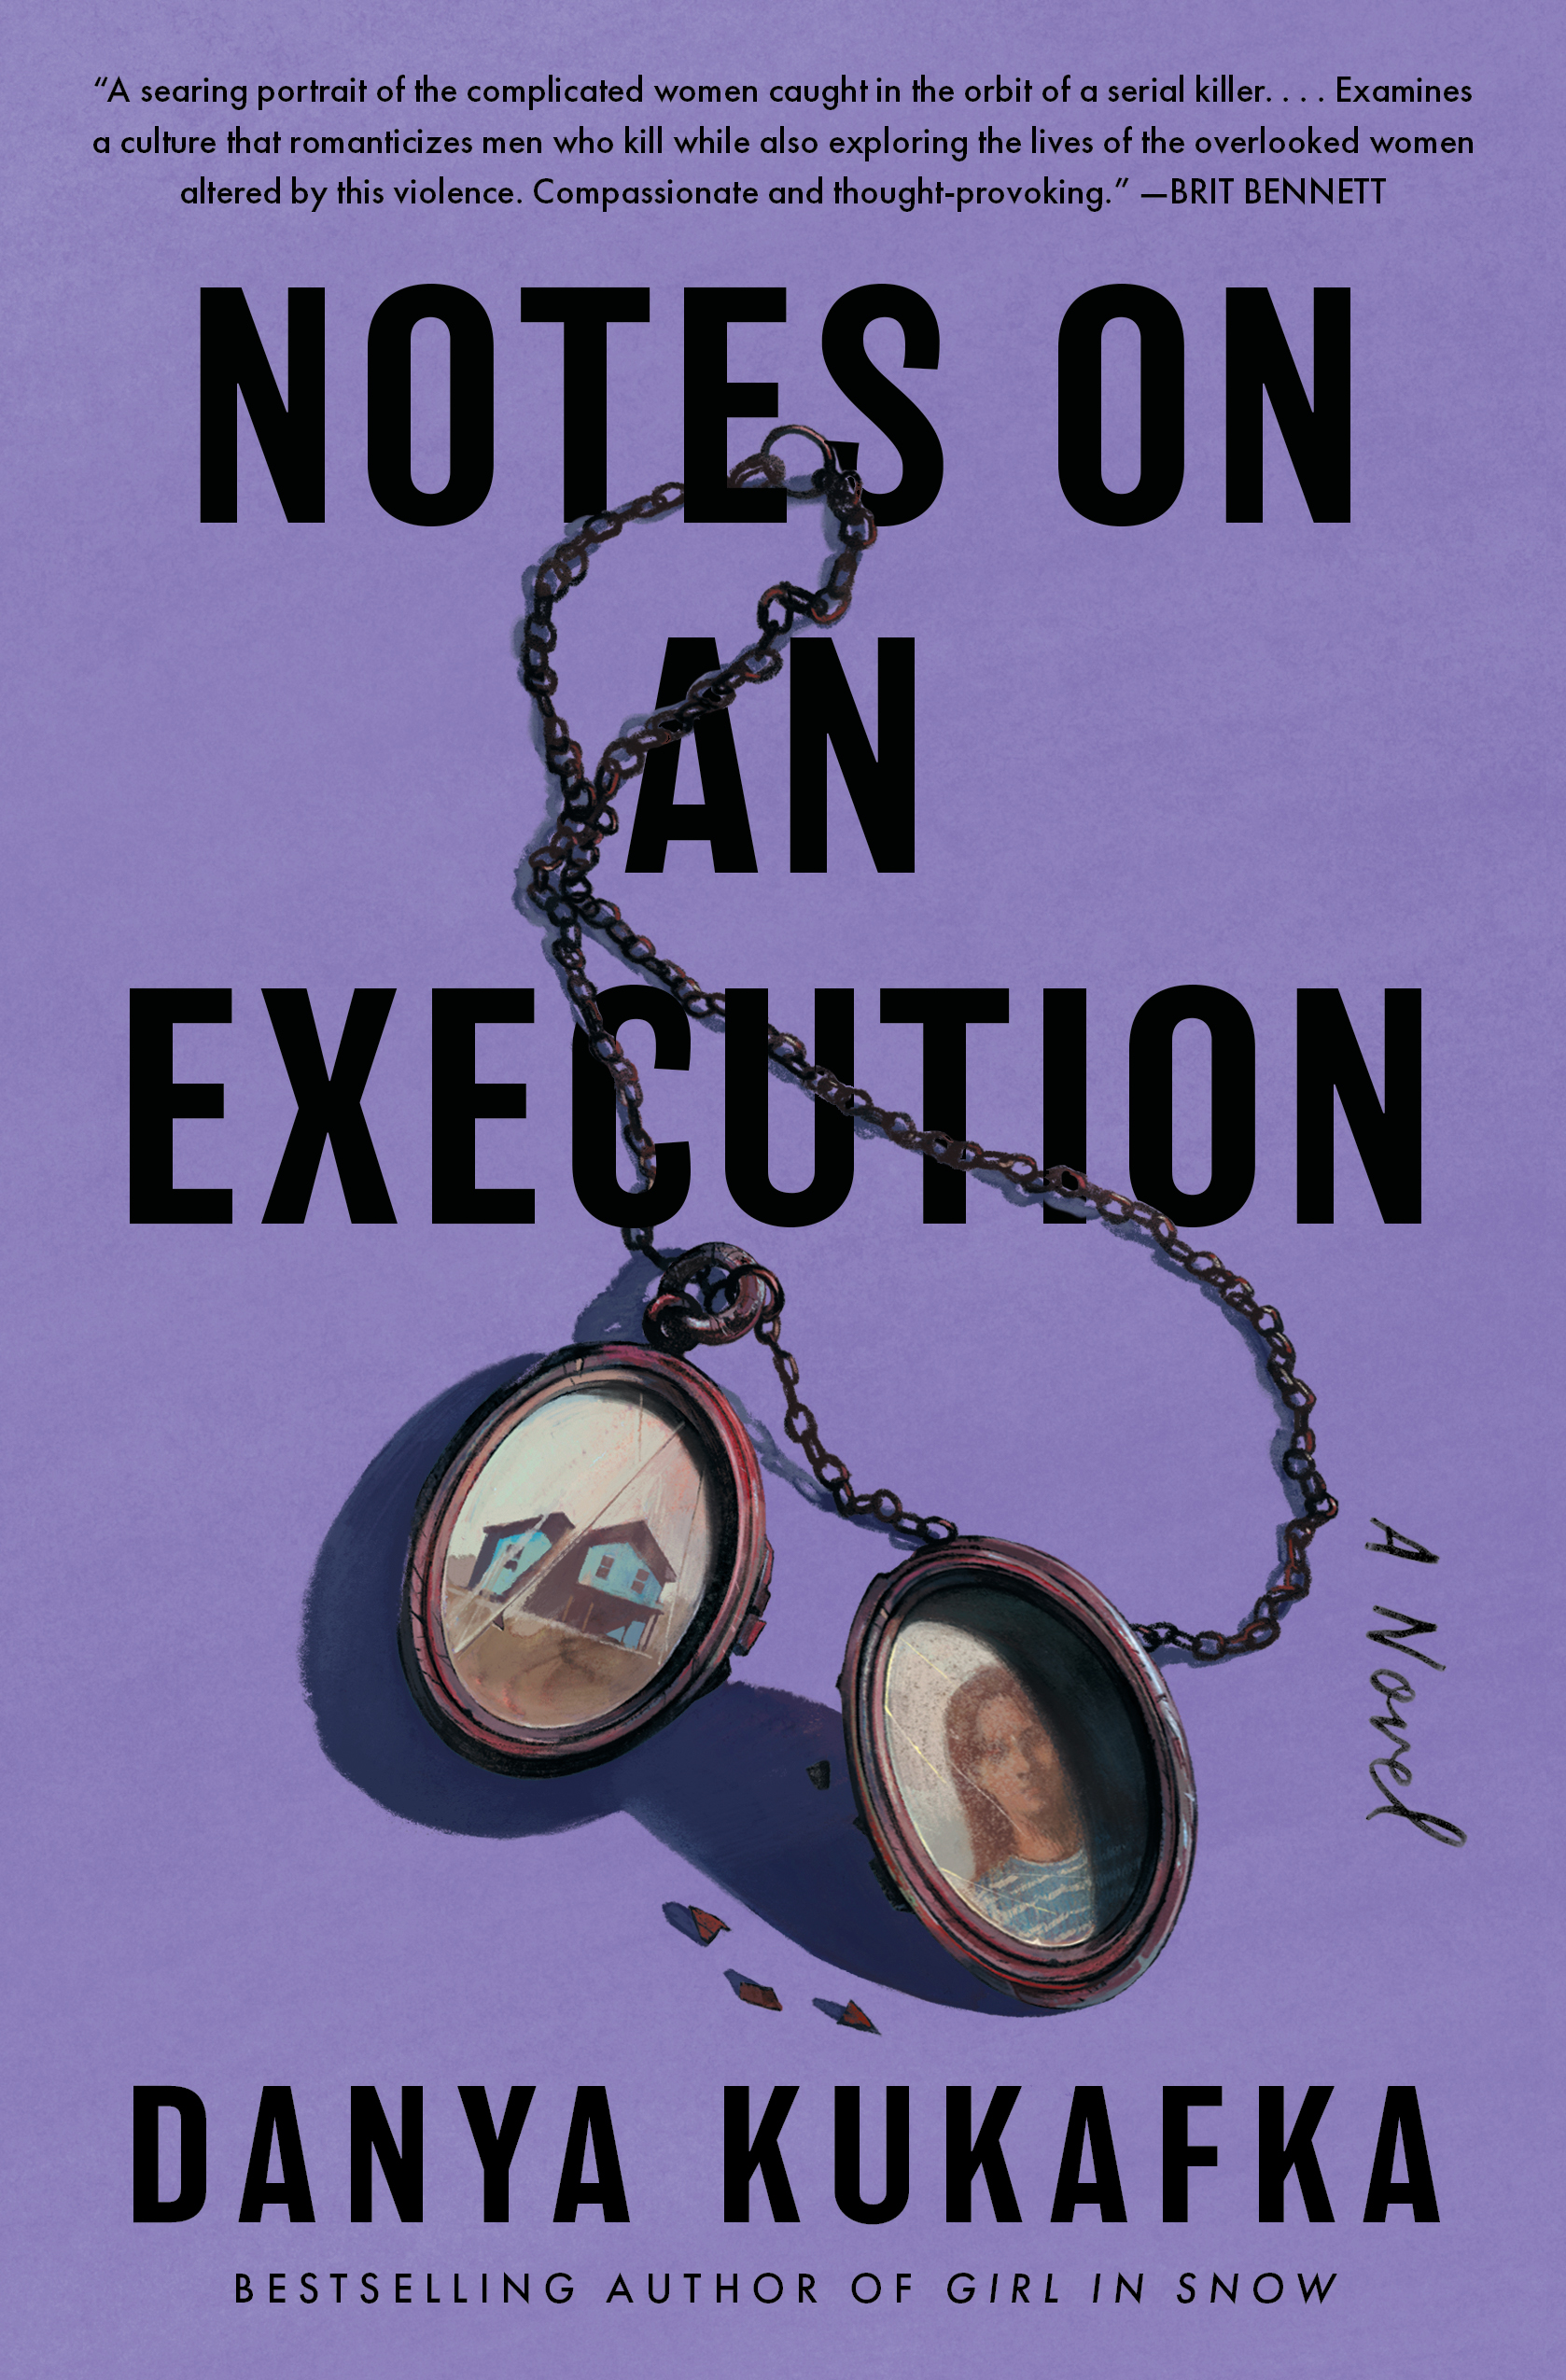 Cover of Notes on an Execution. The background is lavender with black text. There is an image of a broken locket, with a house on one side of the locket and a profile of a woman on the other.